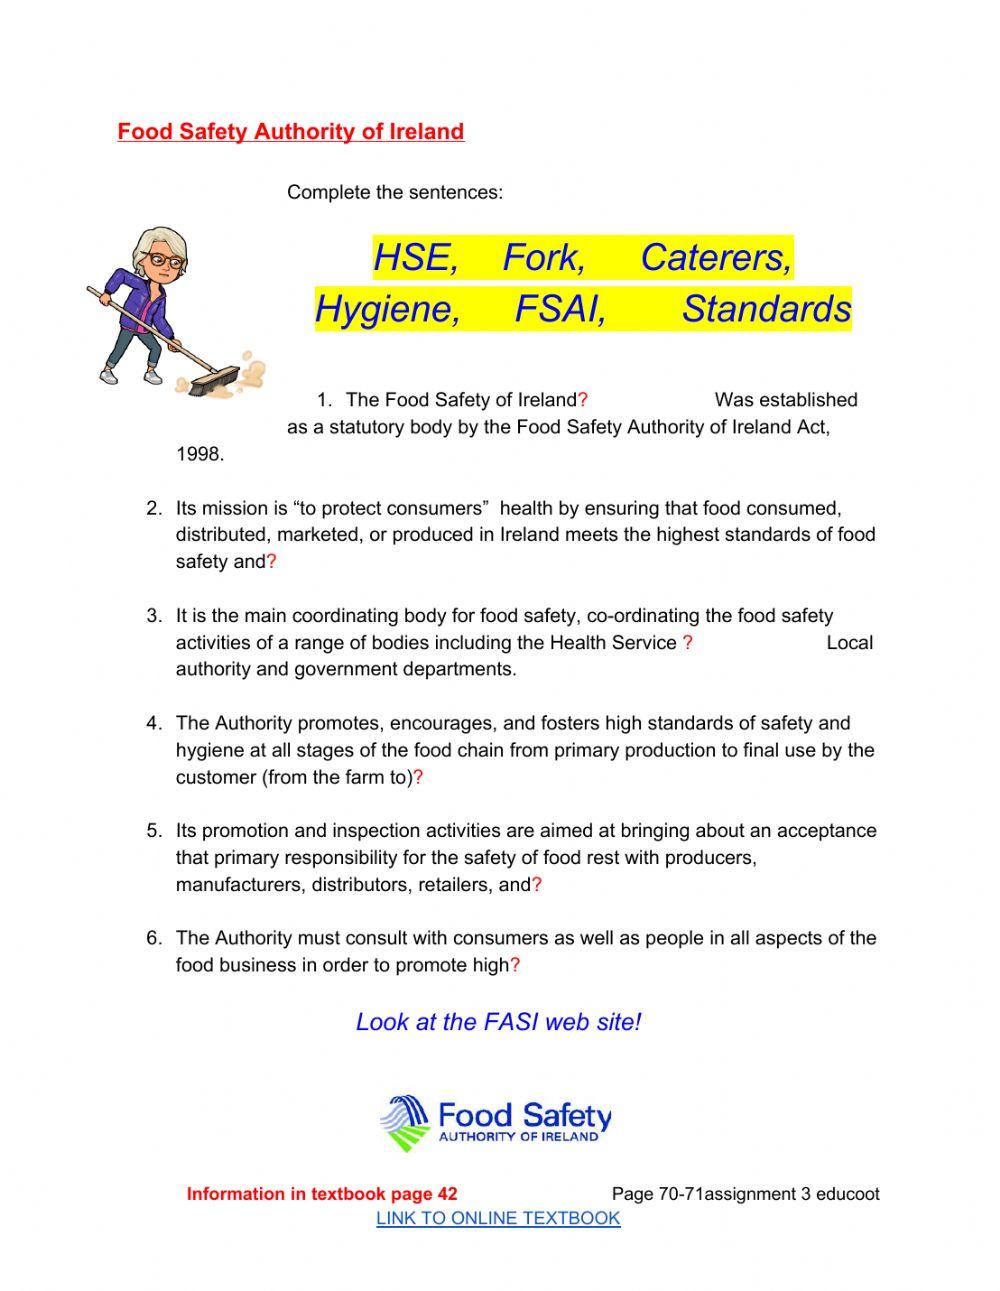 Food safety p70-71